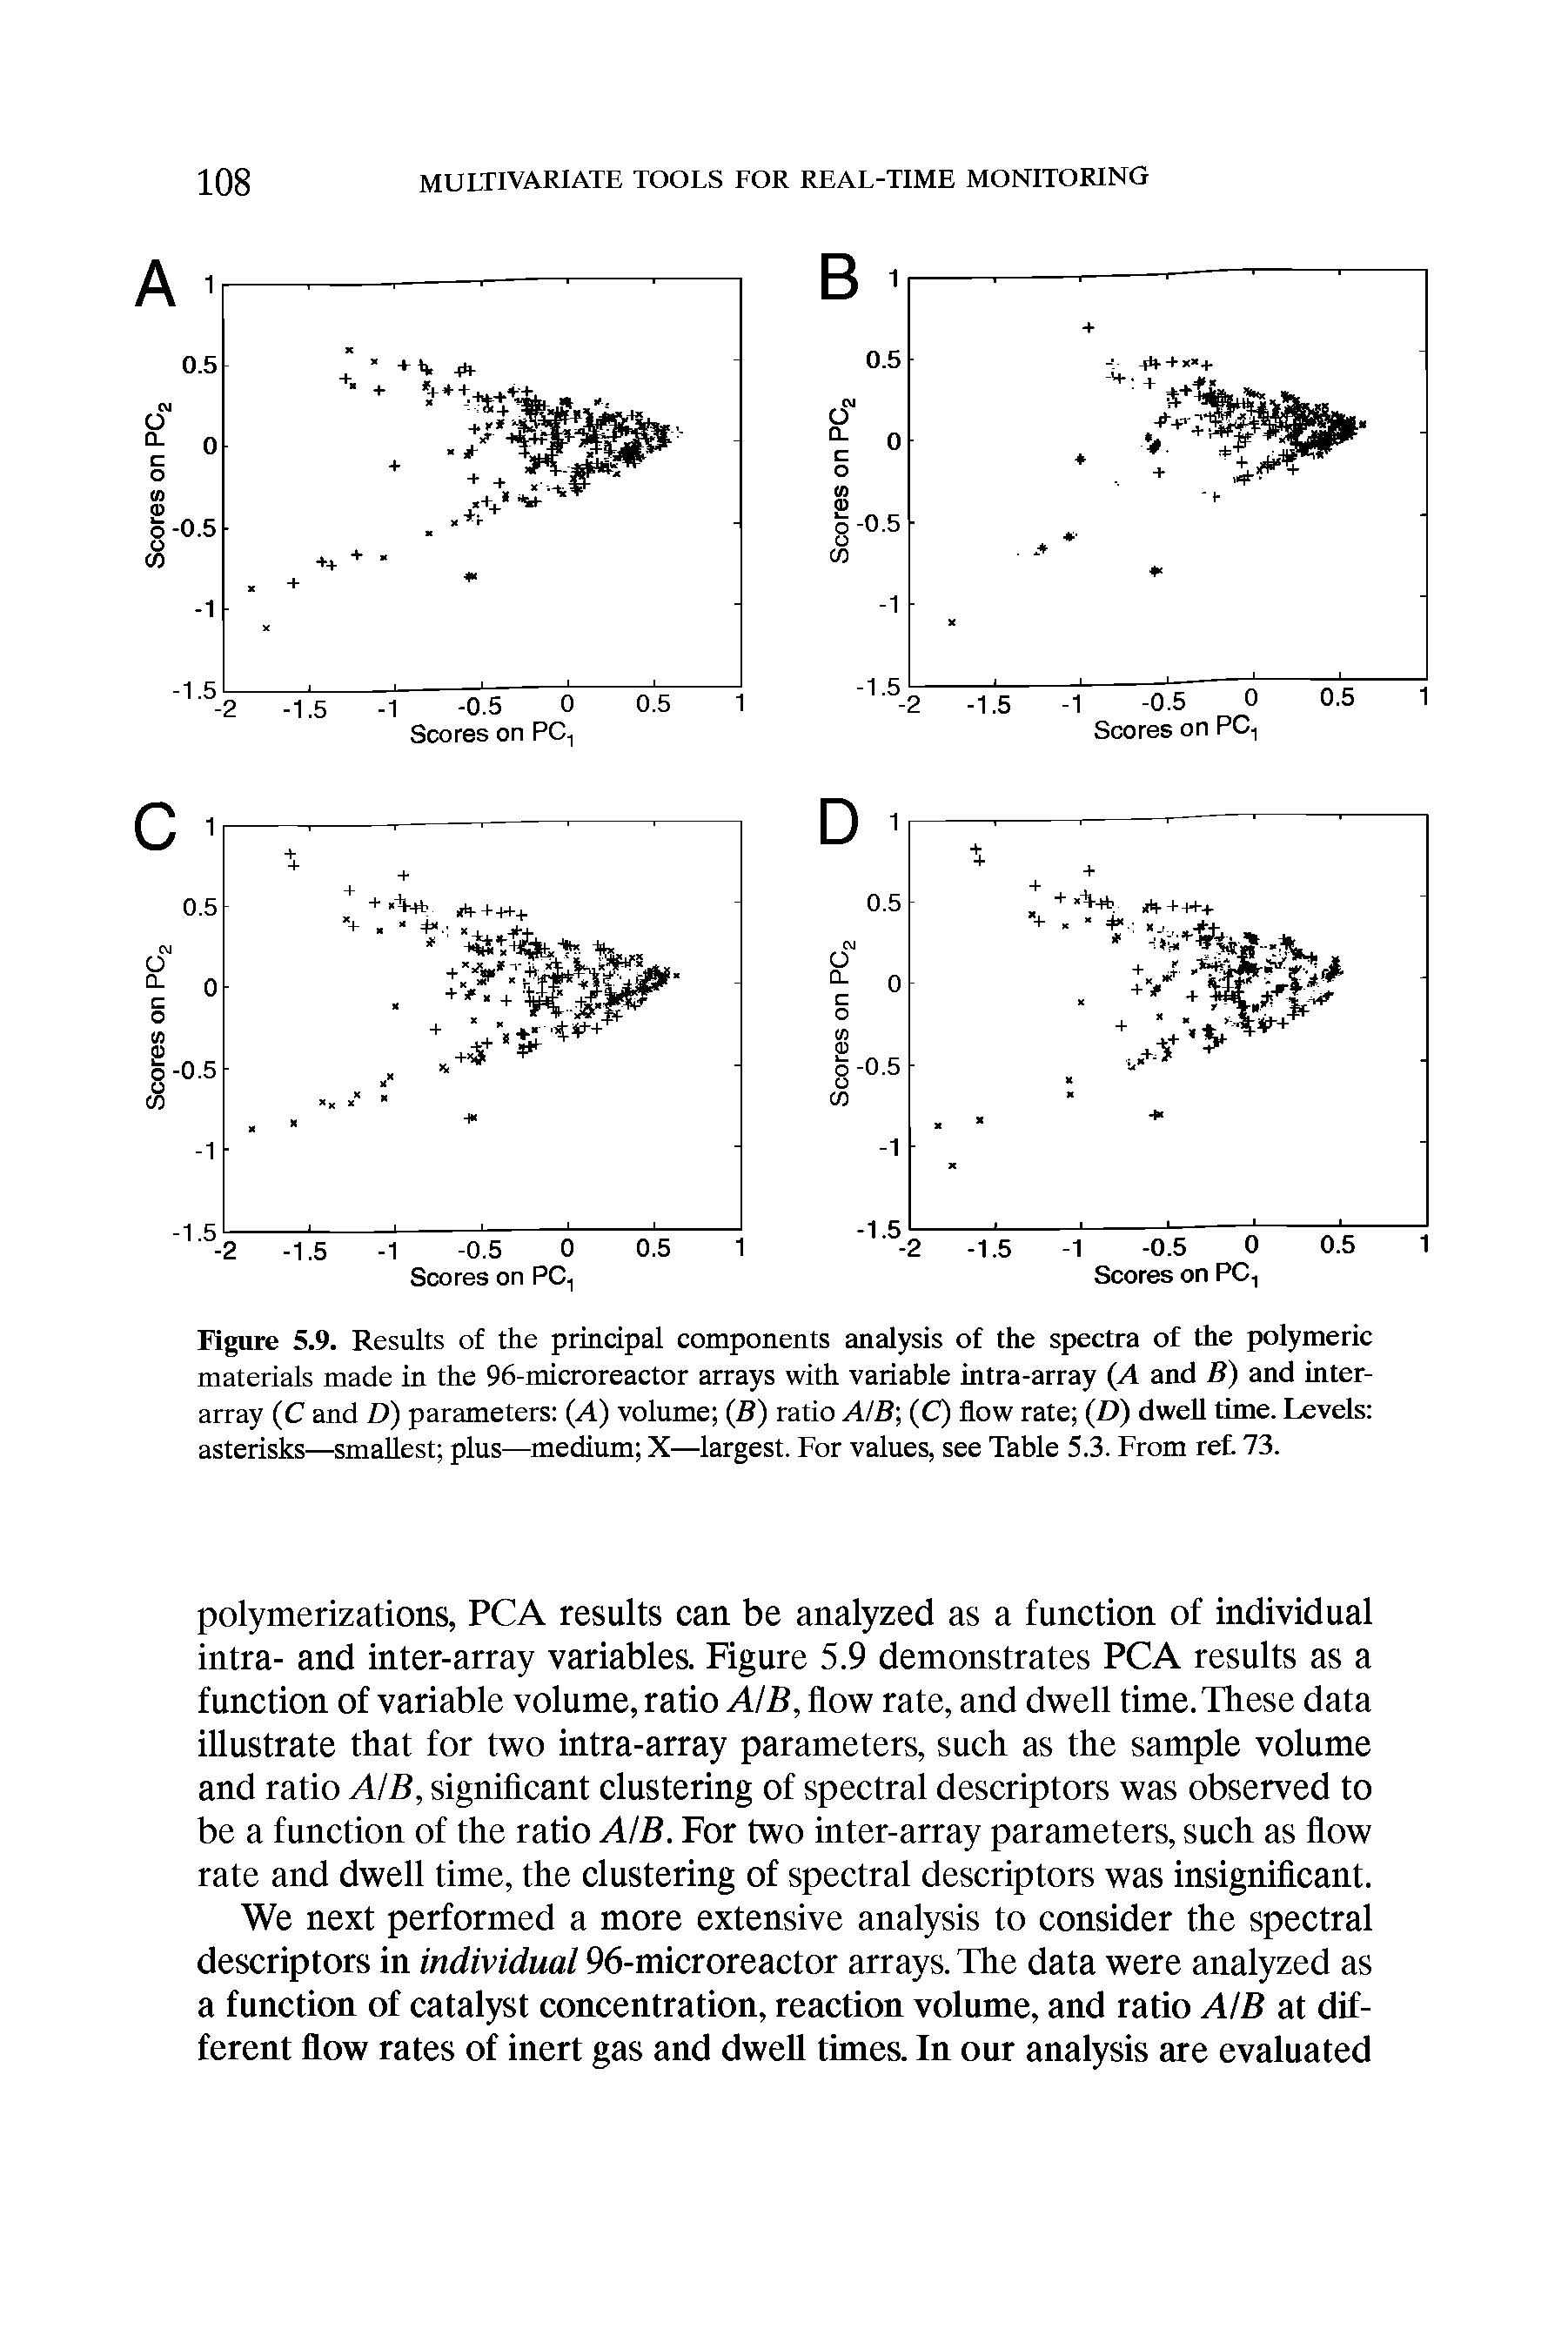 Figure 5.9. Results of the principal components analysis of the spectra of the polymeric materials made in the 96-microreactor arrays with variable intra-array (.4 and B) and interarray (C and D) parameters (A) volume (B) ratio A/B (C) flow rate (D) dwell time. Levels asterisks—smallest plus—medium X—largest. For values, see Table 5.3. From ref. 73.